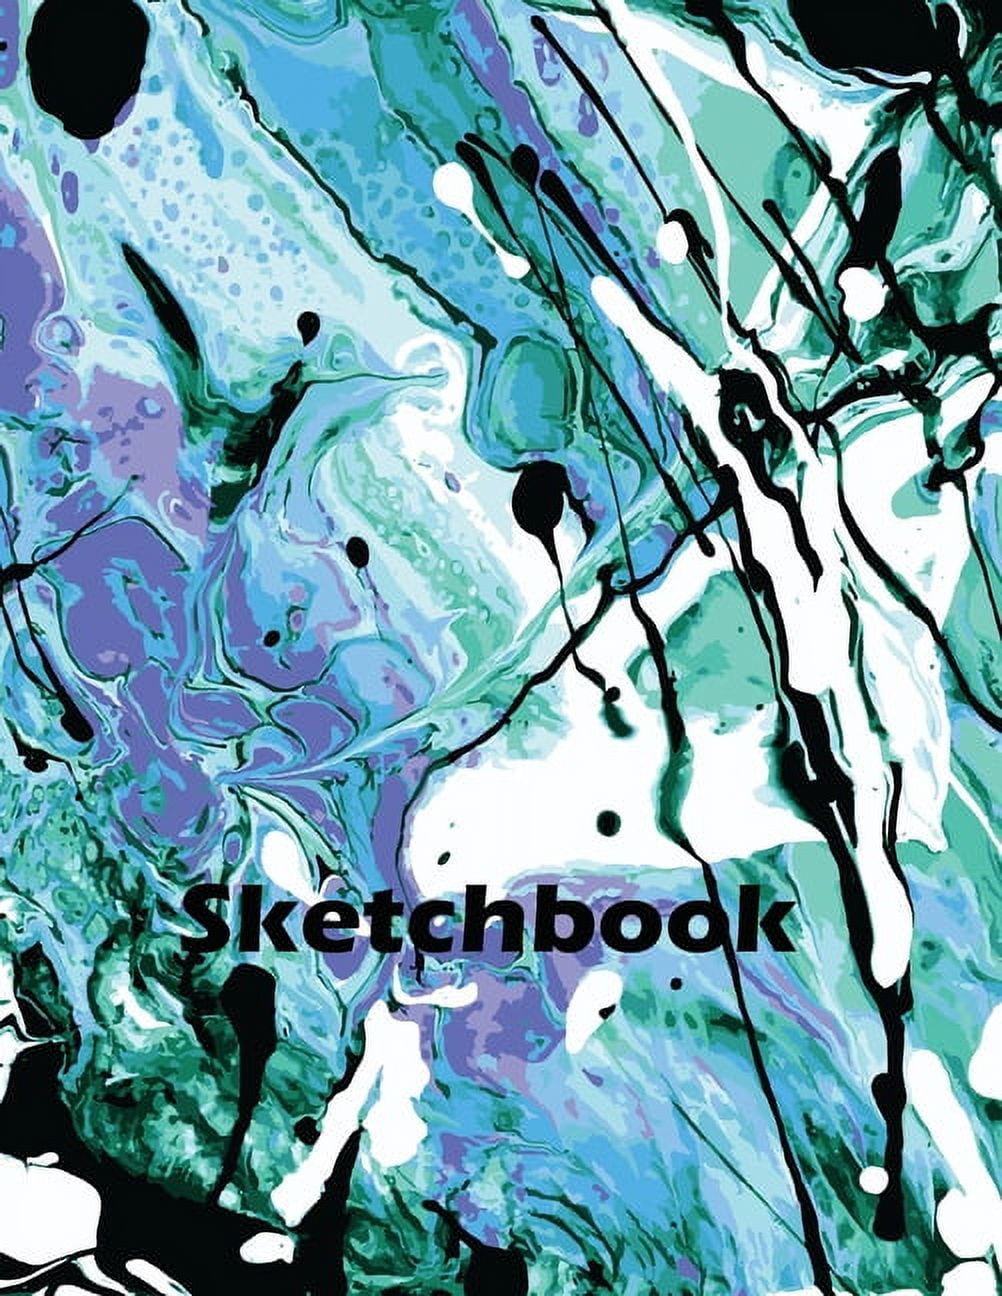 PAINTING ON WATERCOLOR SKETCHBOOK: 8 PRACTICAL TIPS - The Watercolor Story